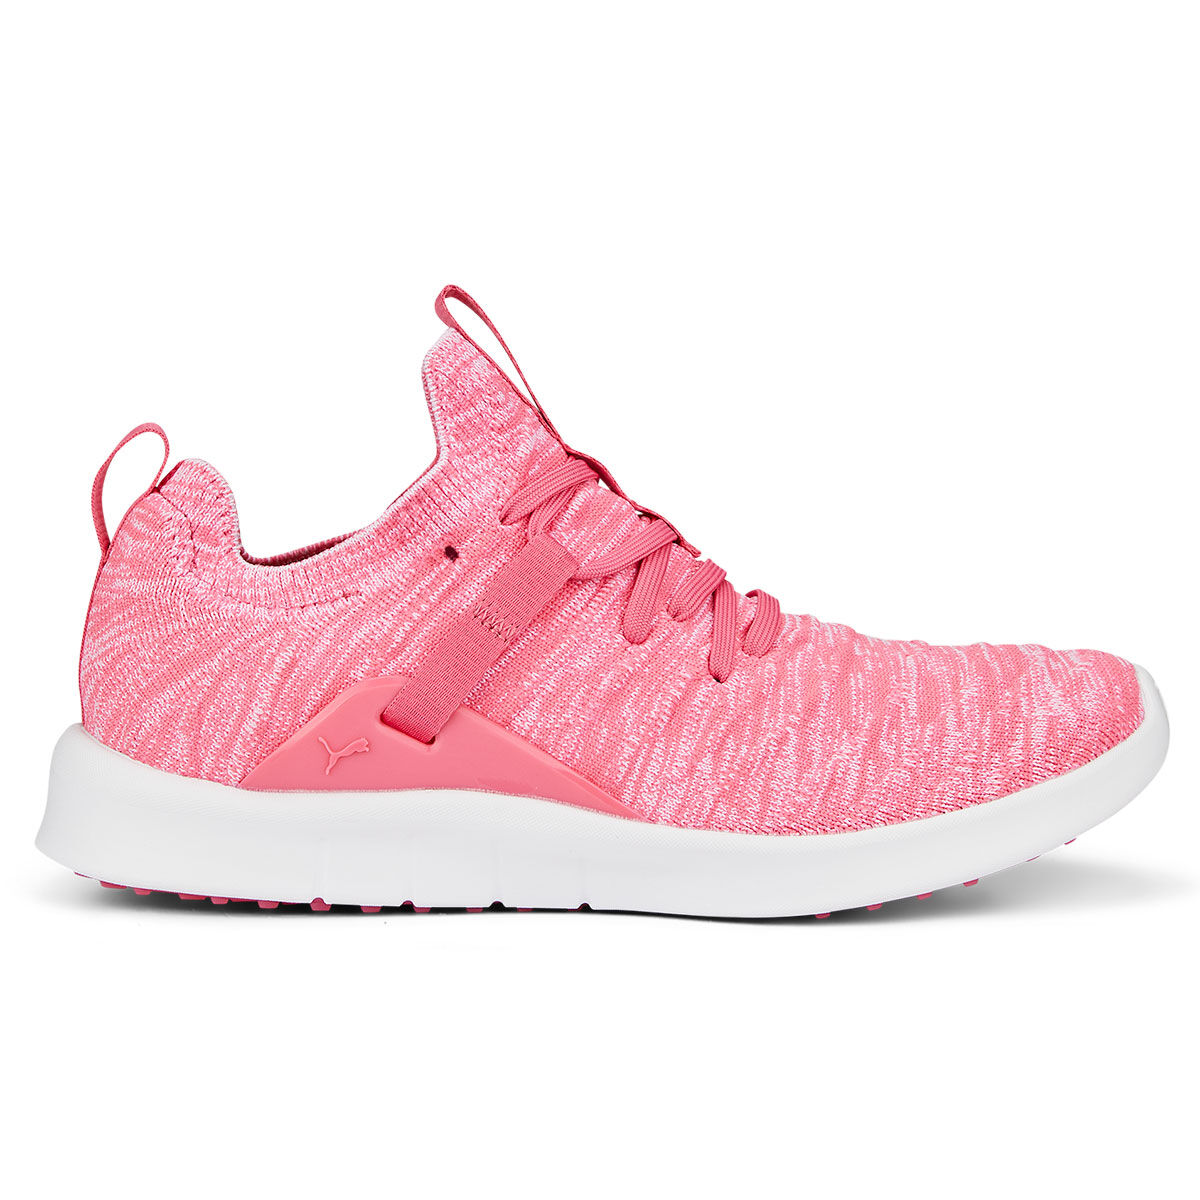 PUMA Golf Women’s Pink and White Knitted PUMA Laguna Fusion Knit Spikeless Golf Shoes, Size: 5 | American Golf